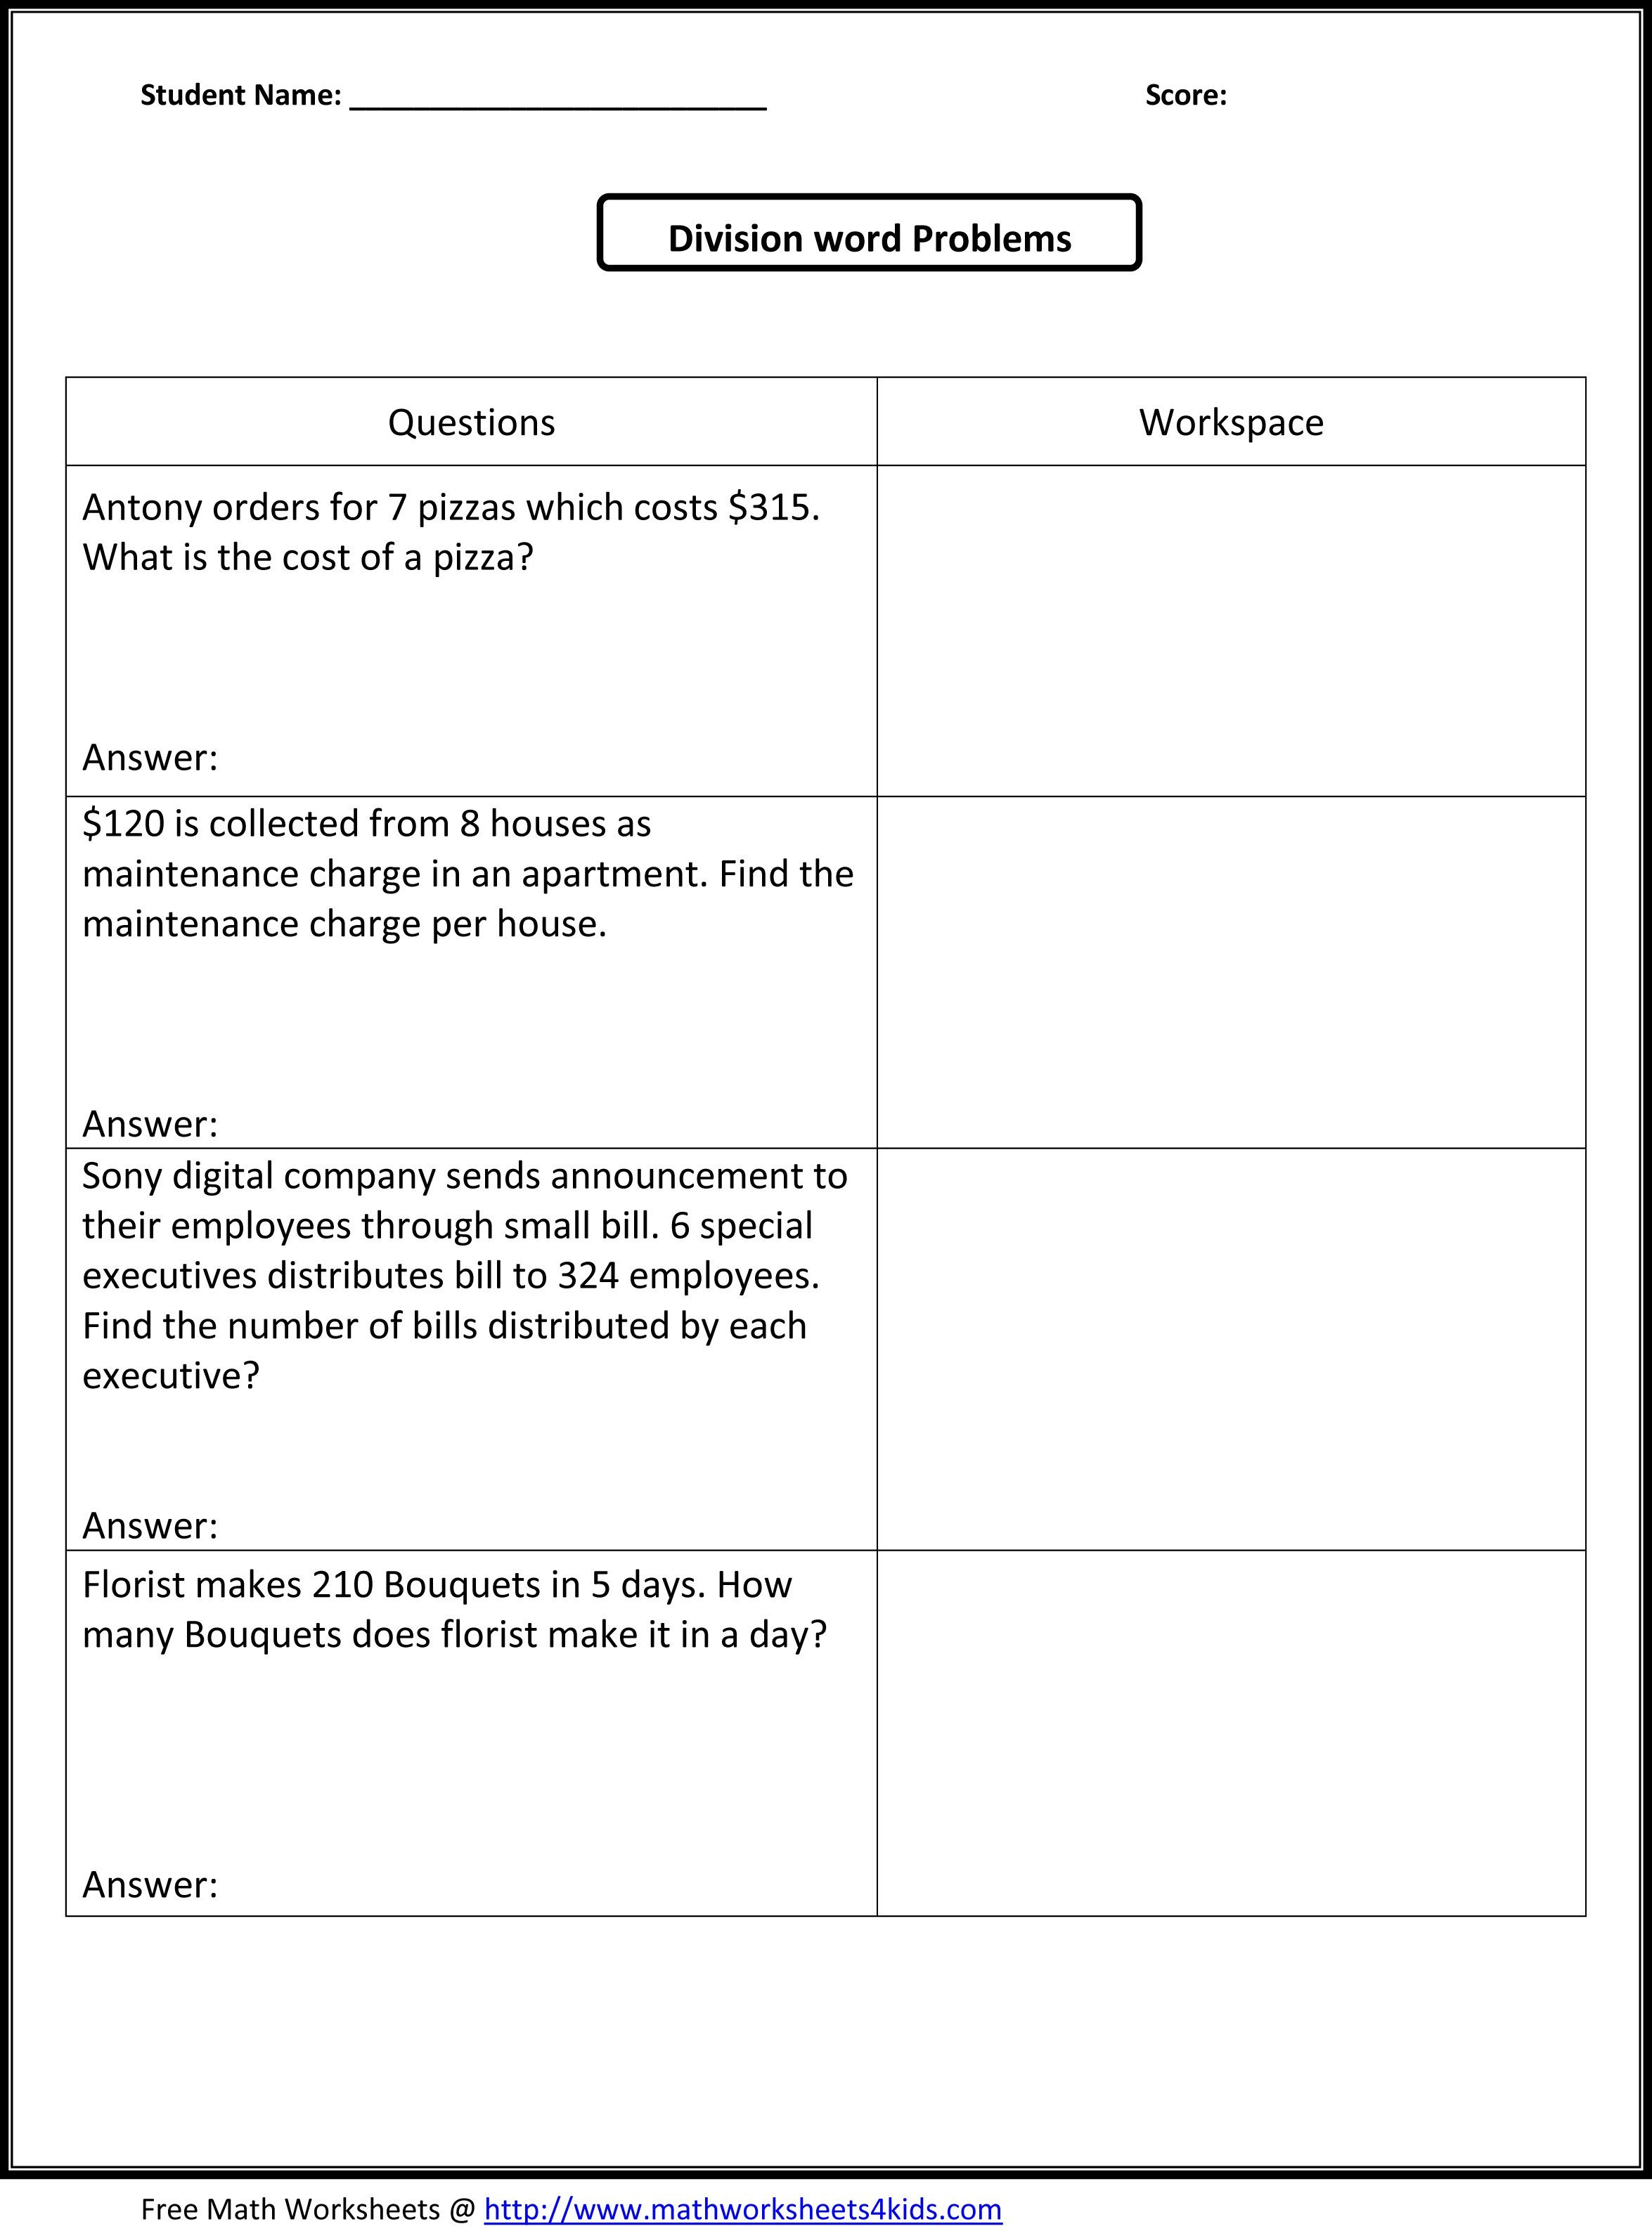 Ideas Of Inequality Word Problems Worksheet Algebra 1 Answers Fresh For Inequality Word Problems Worksheet Algebra 1 Answers